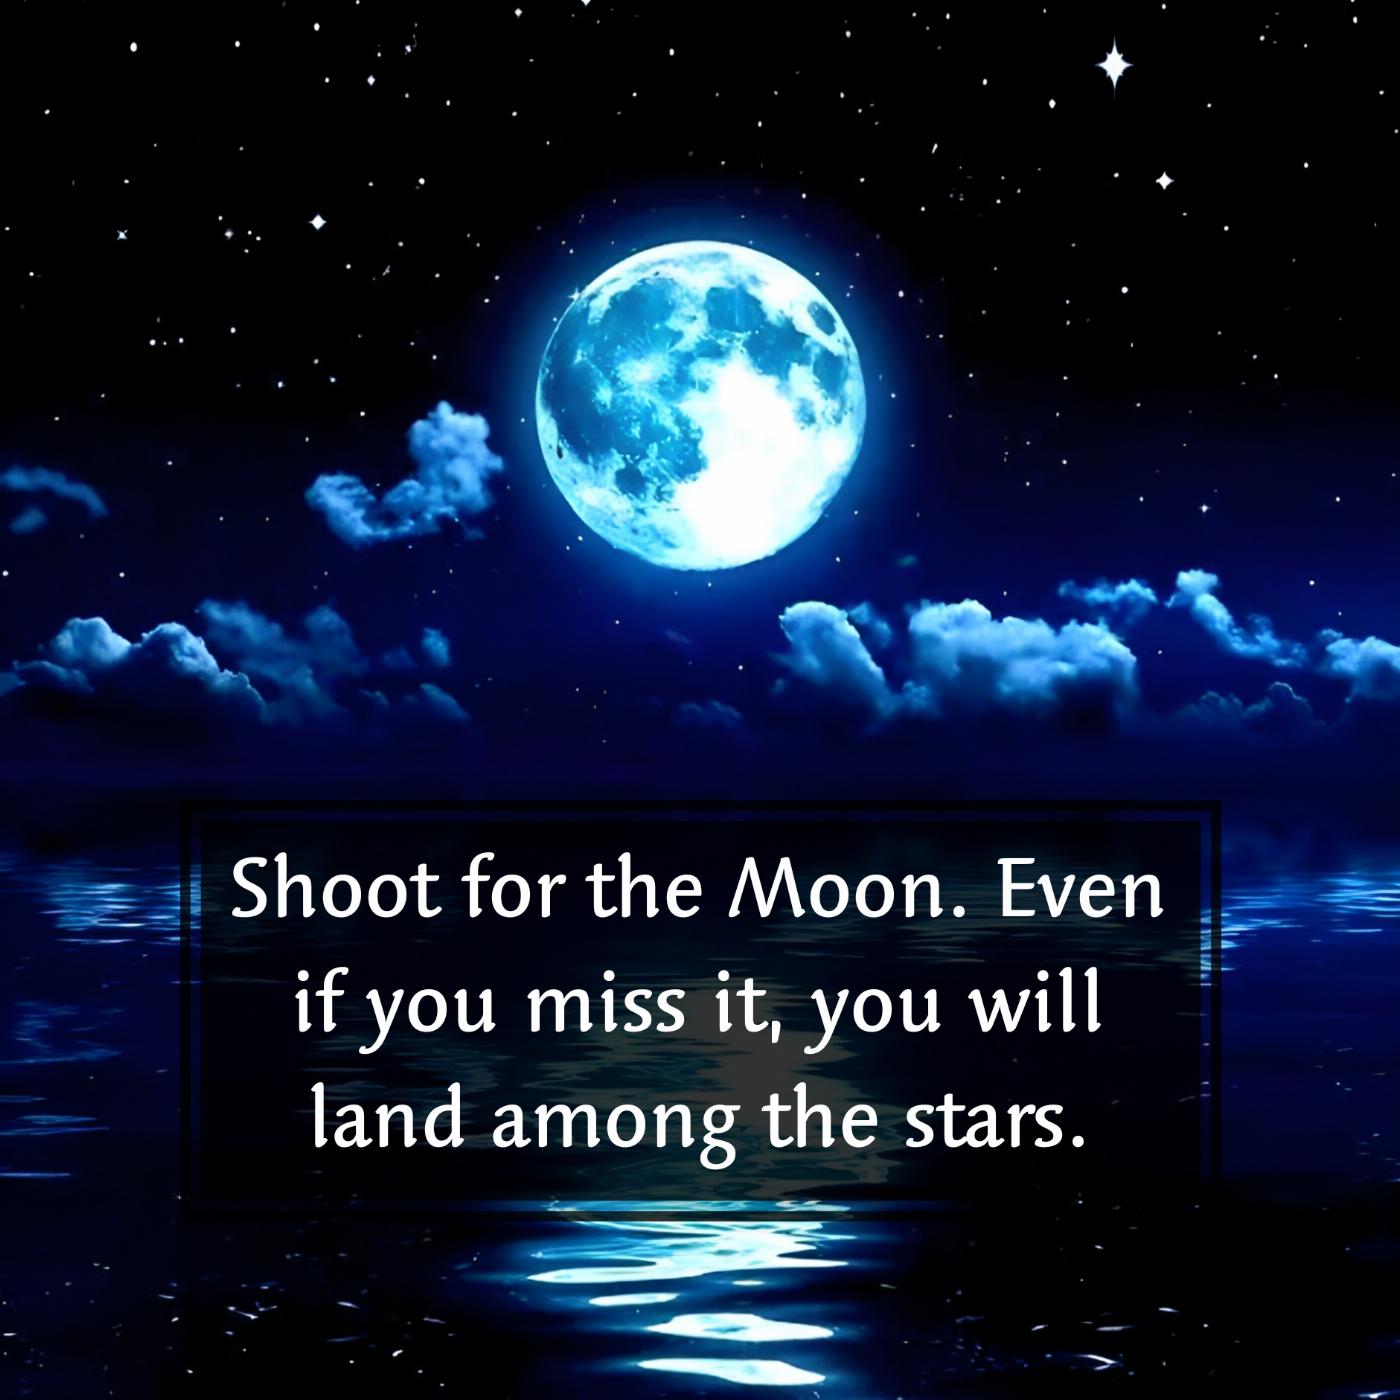 Shoot for the Moon Even if you miss it